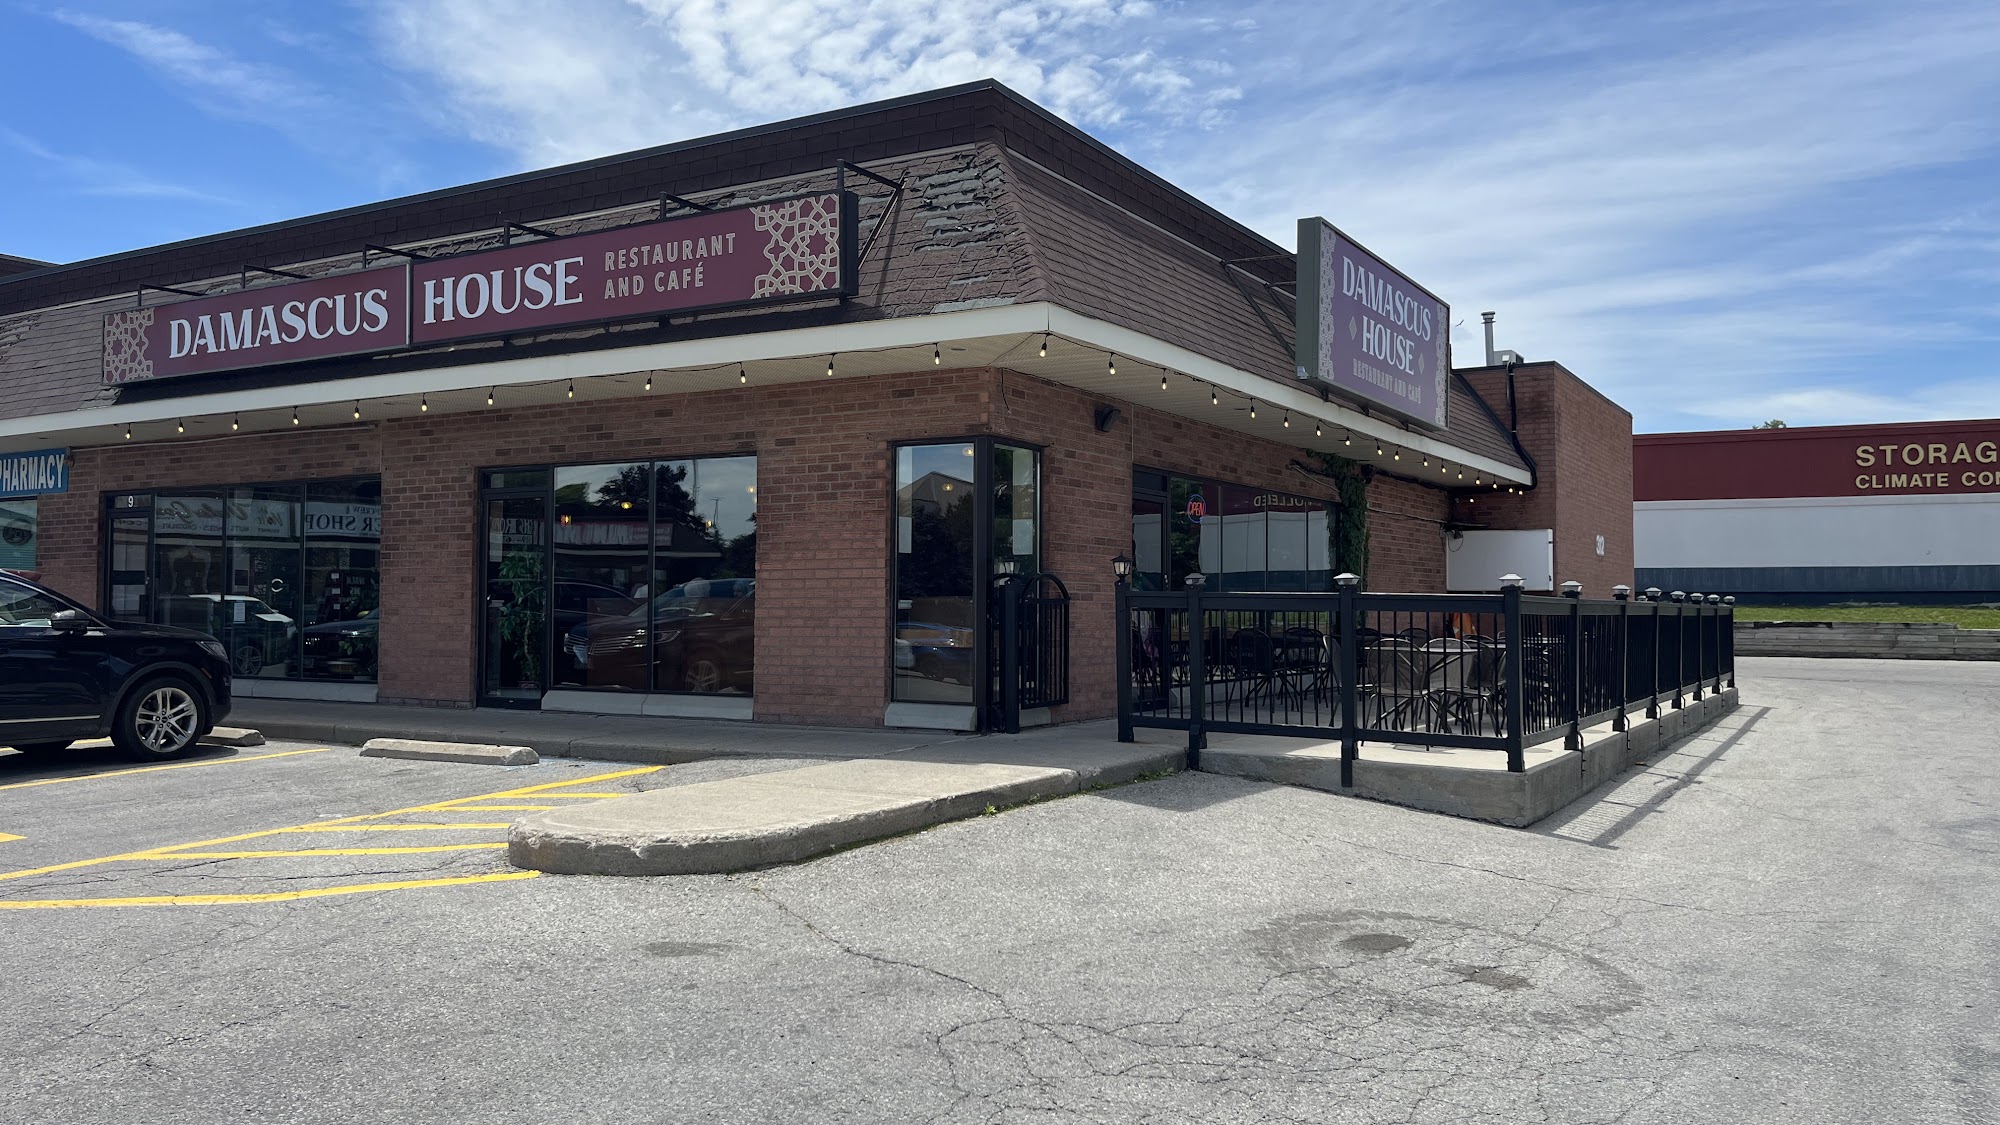 Damascus House Restaurant and Cafe